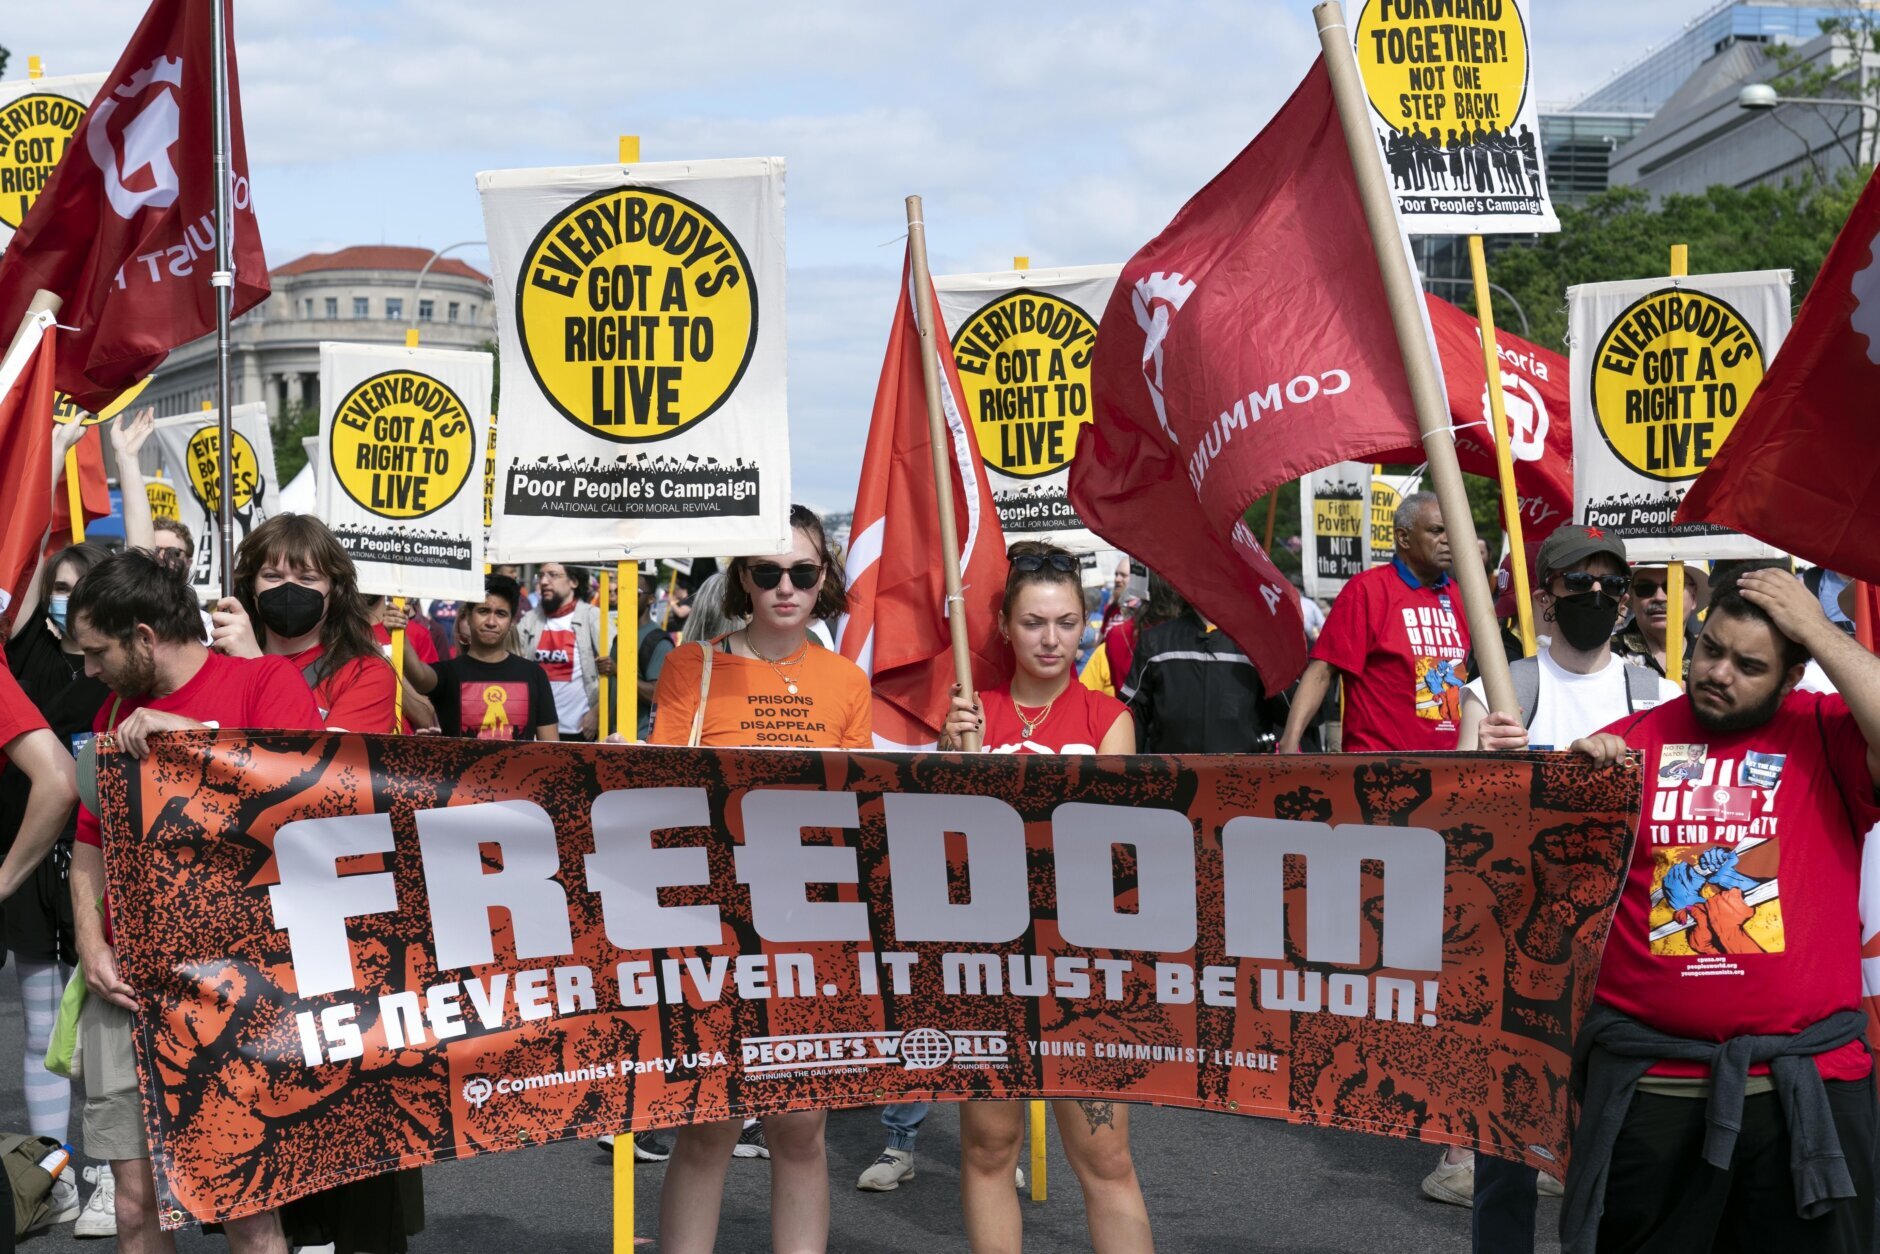 Demonstrators march during the Poor People's Campaign, "Moral March" on Pennsylvania Avenue in Washington, Saturday, June 18, 2022. (AP Photo/Jose Luis Magana)